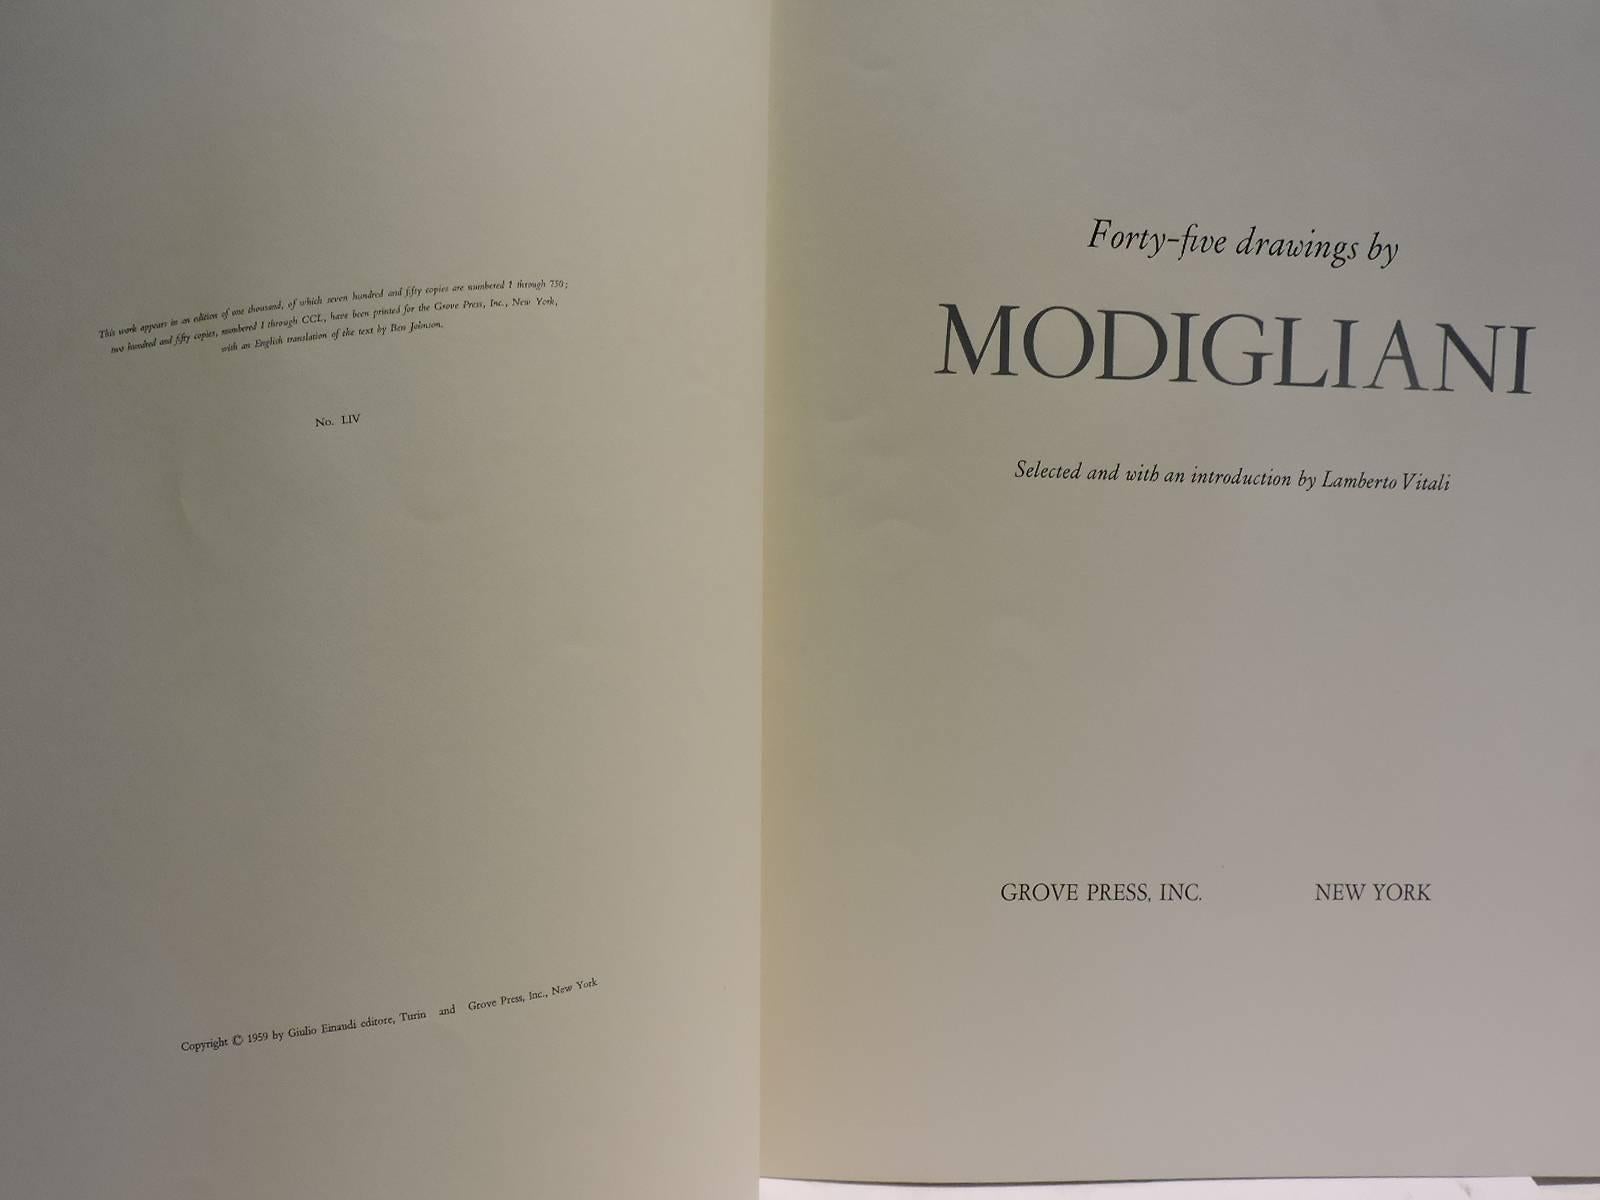 Forty-Five Drawings by Modigliani - Selected and with an introduction by Lamberto Vitali, Grove Press Inc. New York. This work appears in an edition of one thousand, of which seven hundred and fifty copies are numbered 1 through 750; two hundred and